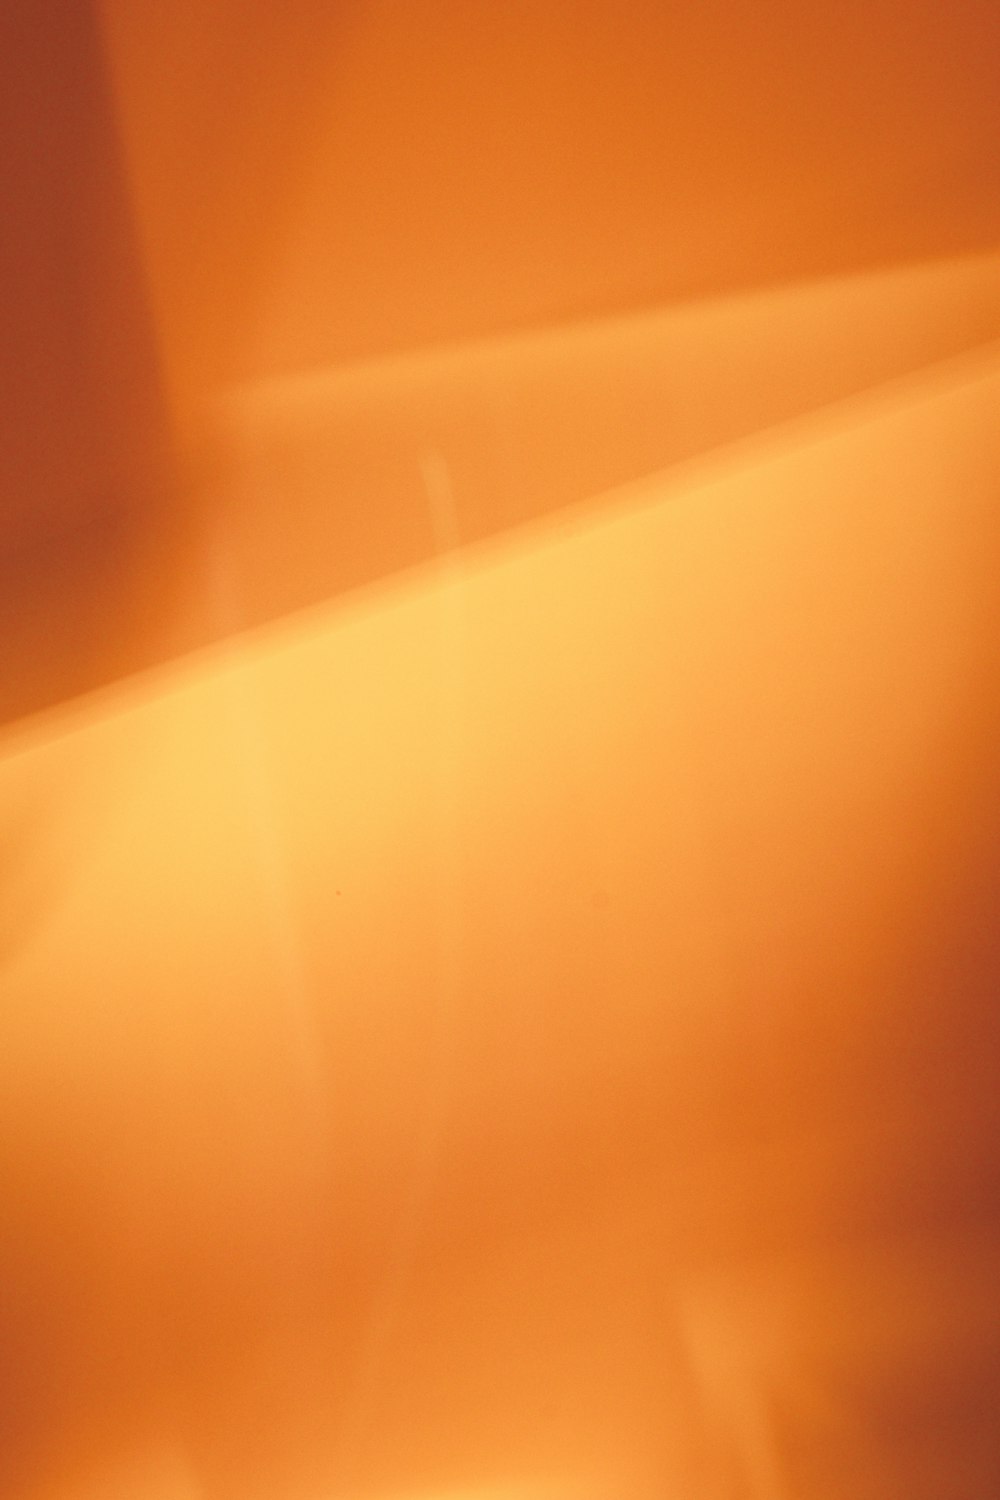 a blurry image of an orange wall